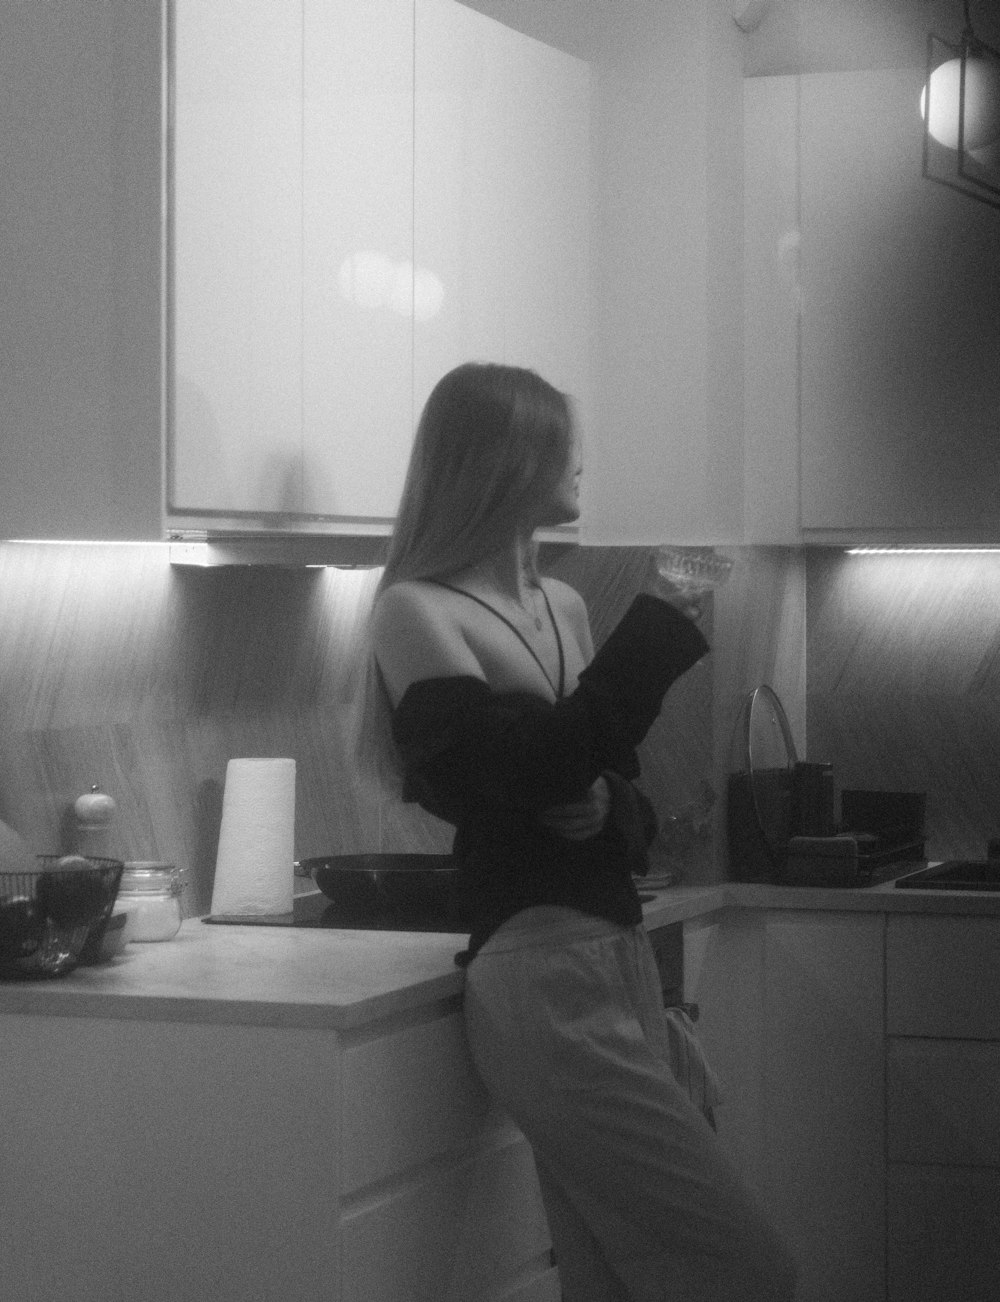 a woman sitting on a counter in a kitchen